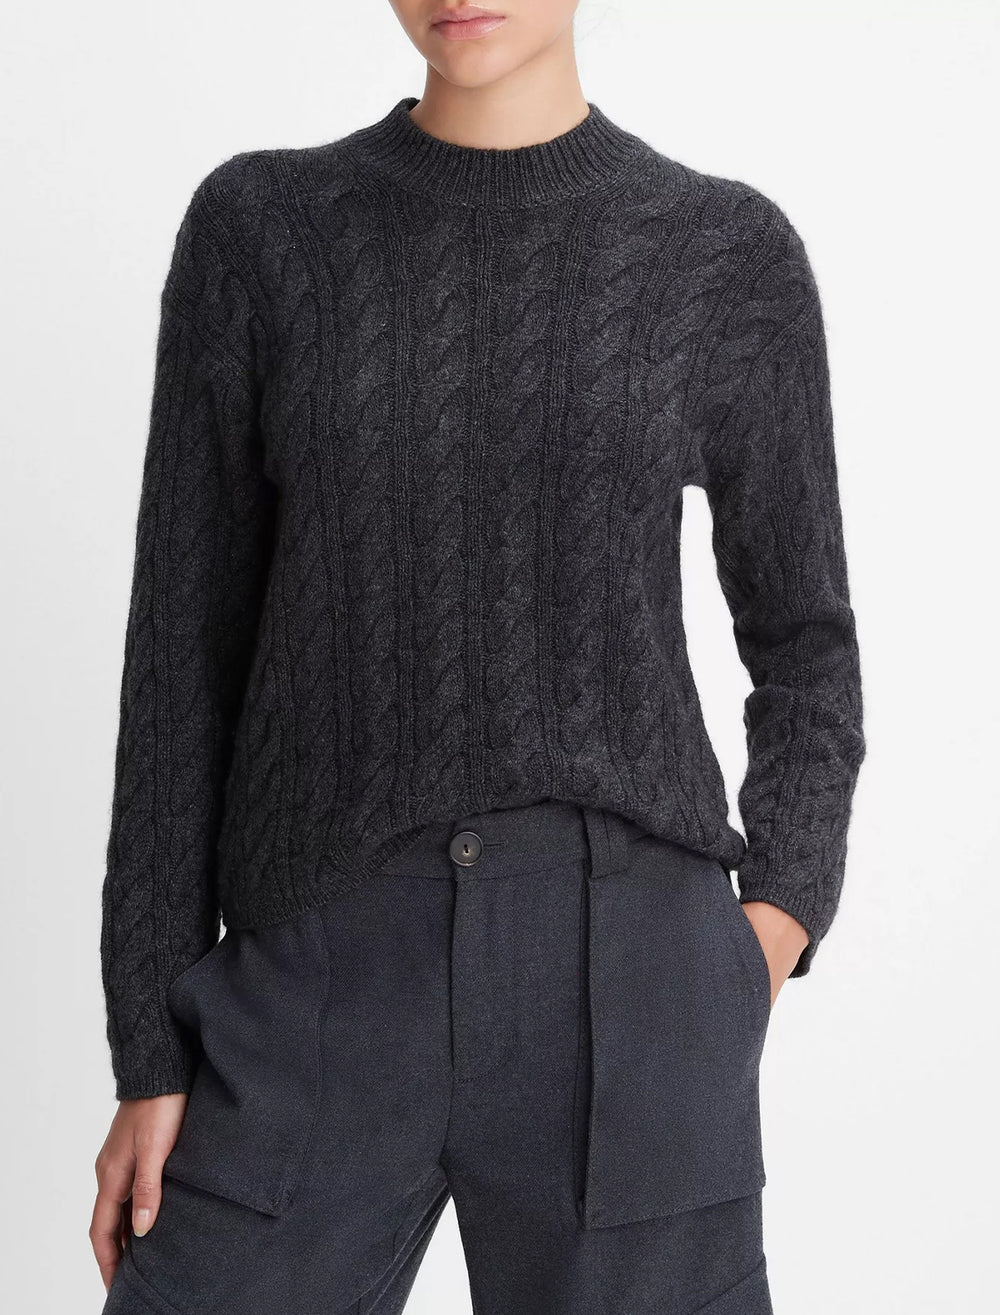 Model wearing Vince's twist cable cropped crew sweater in charcoal.